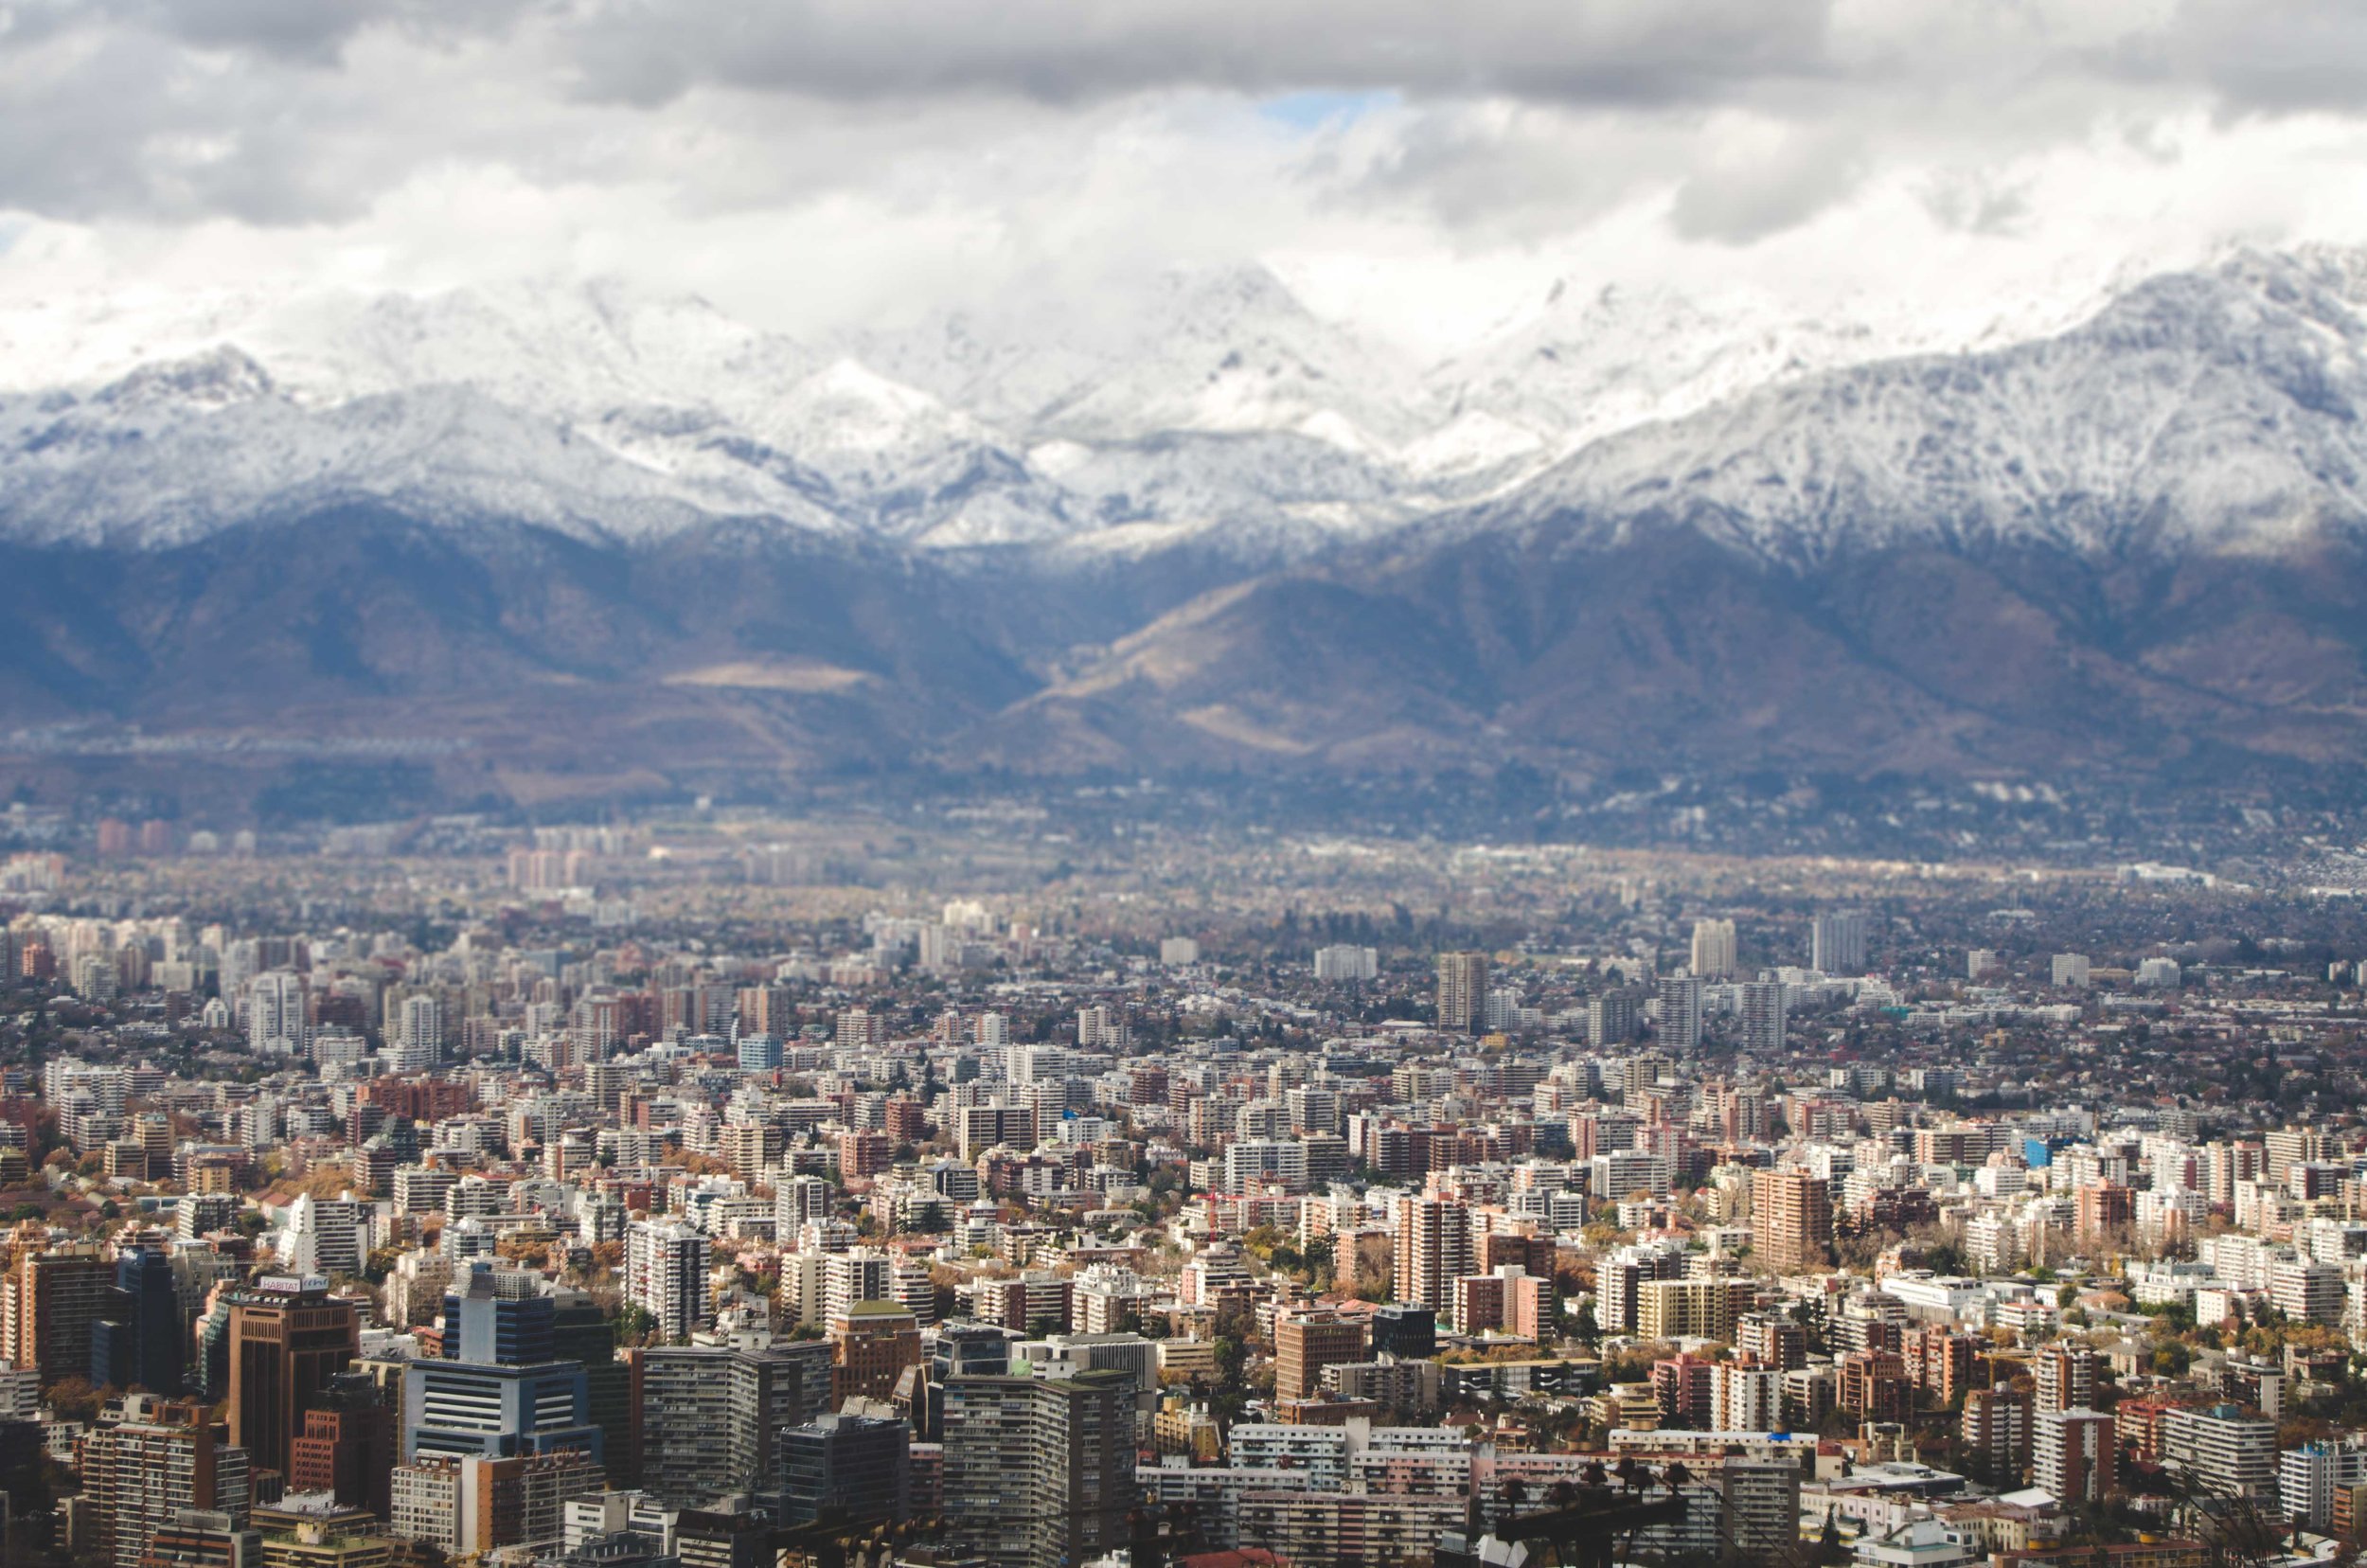  Santiago is in a  cuenca , a basin whose sides are the Andes mountains on one side and the coastal mountains on the other. It makes for beautiful views, but it traps the smog. 